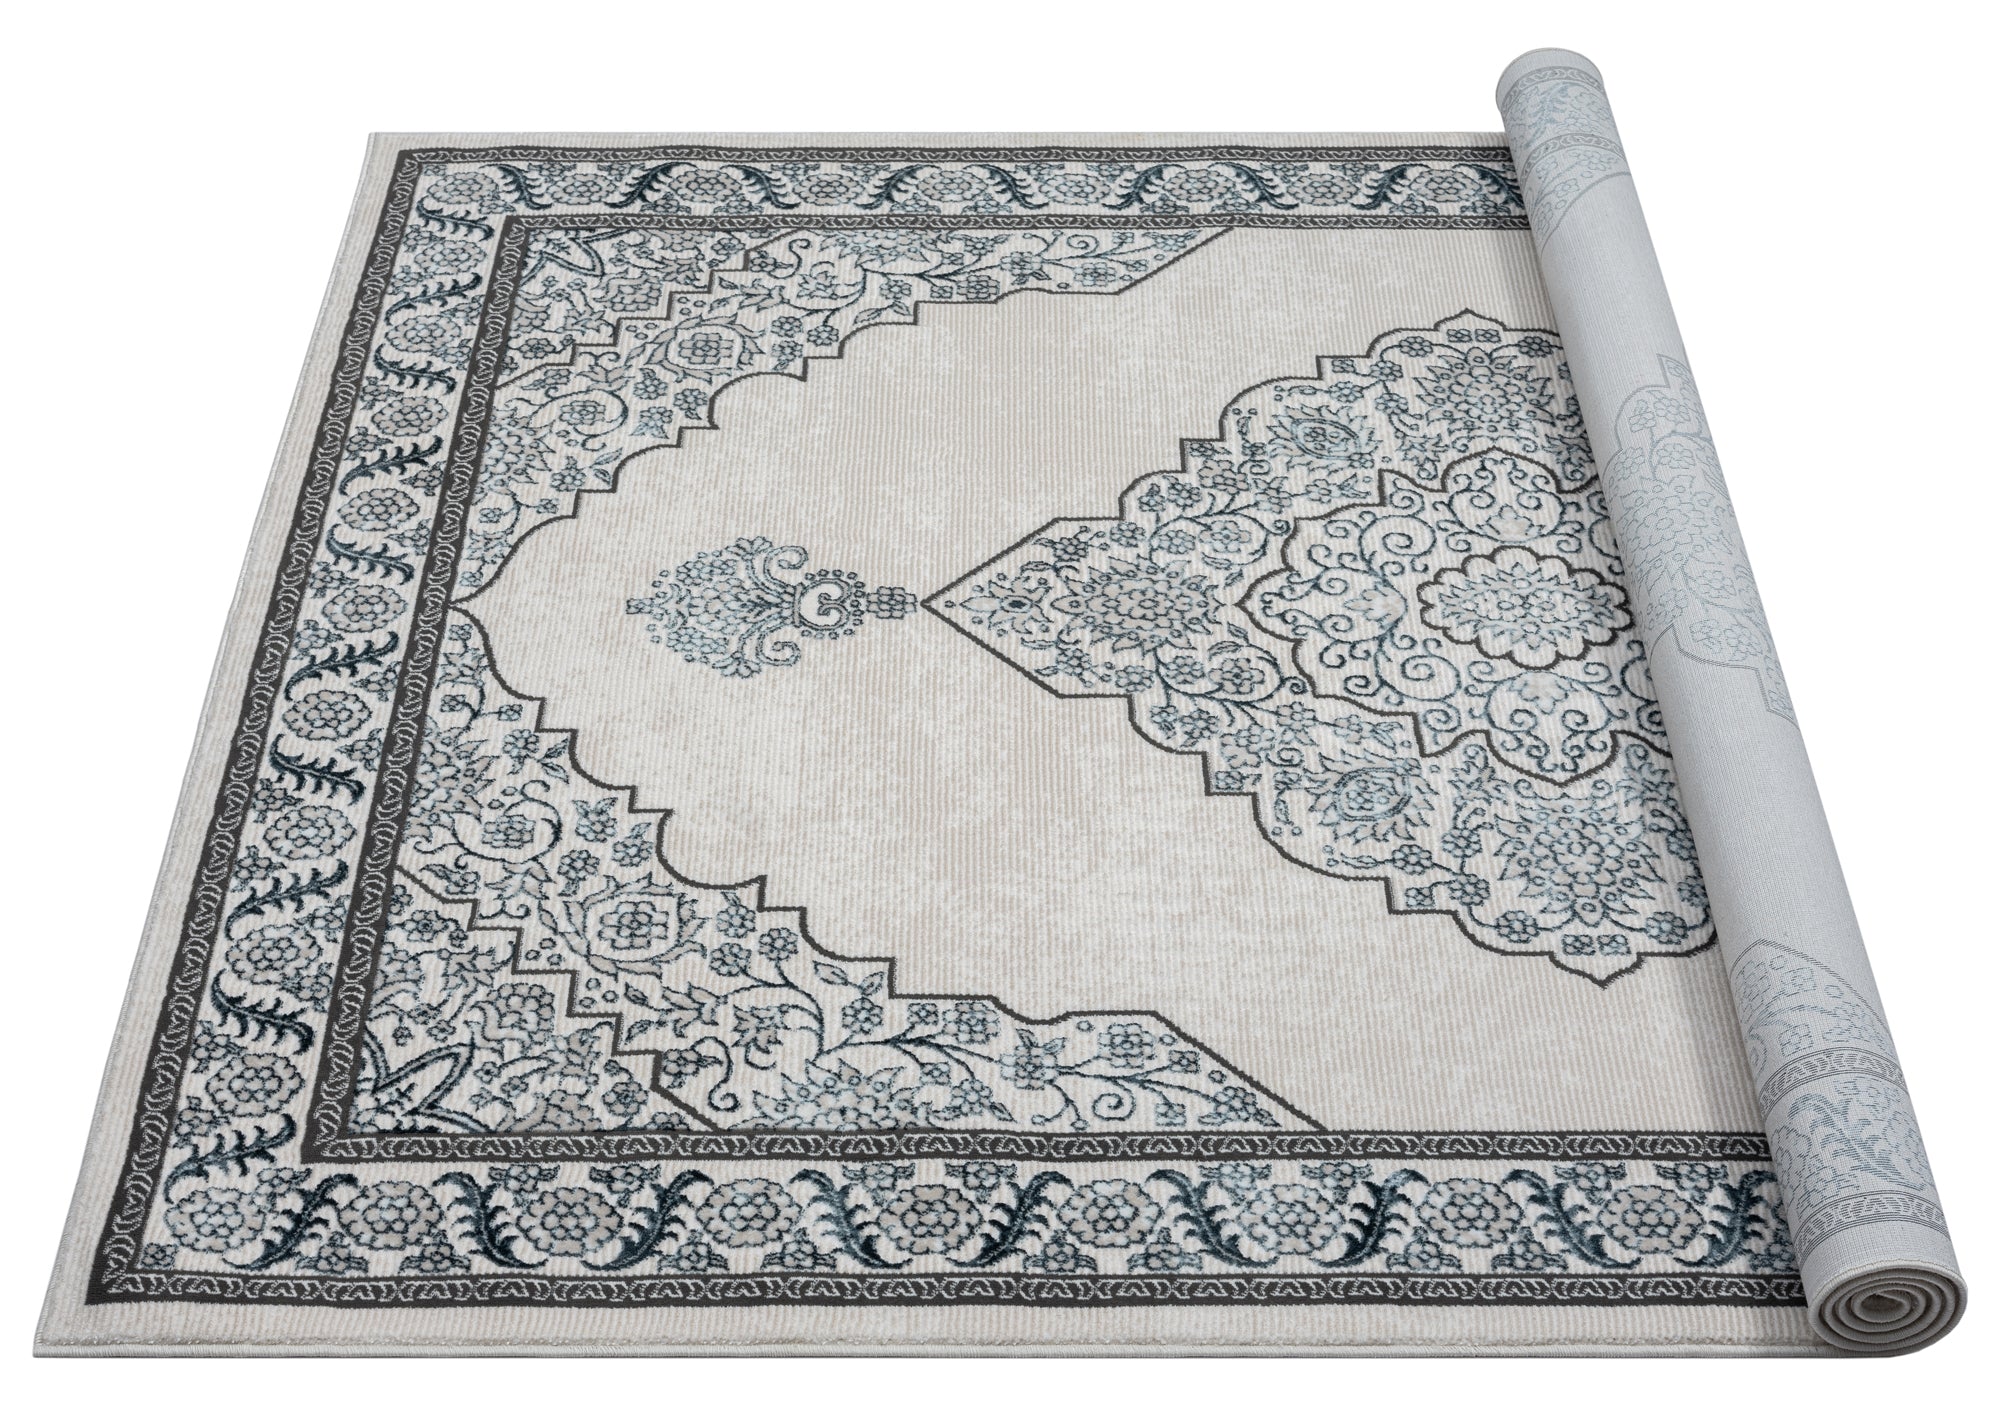 American cover design / Persian weavers Boutique 452 Frost Rug